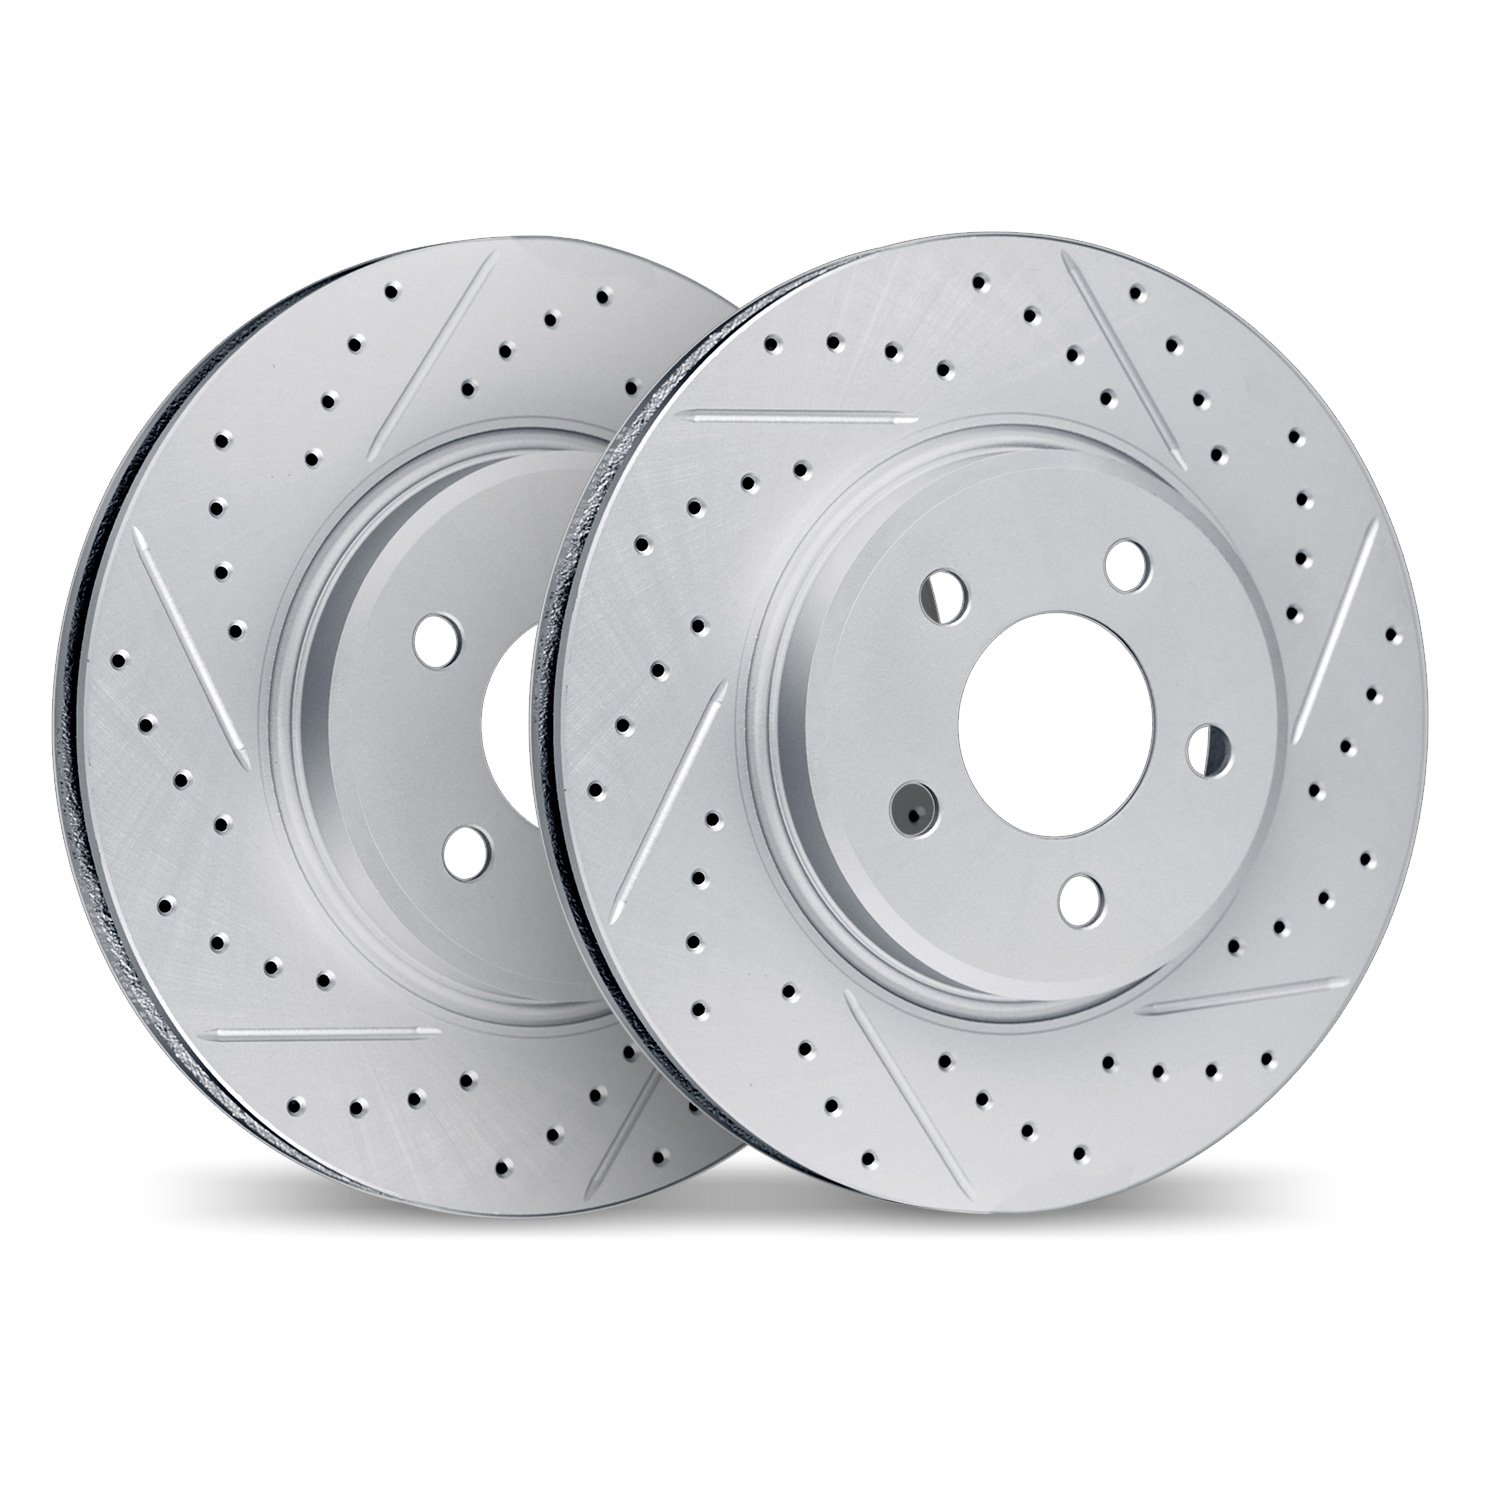 2002-59029 Geoperformance Drilled/Slotted Brake Rotors, 2000-2009 Acura/Honda, Position: Front